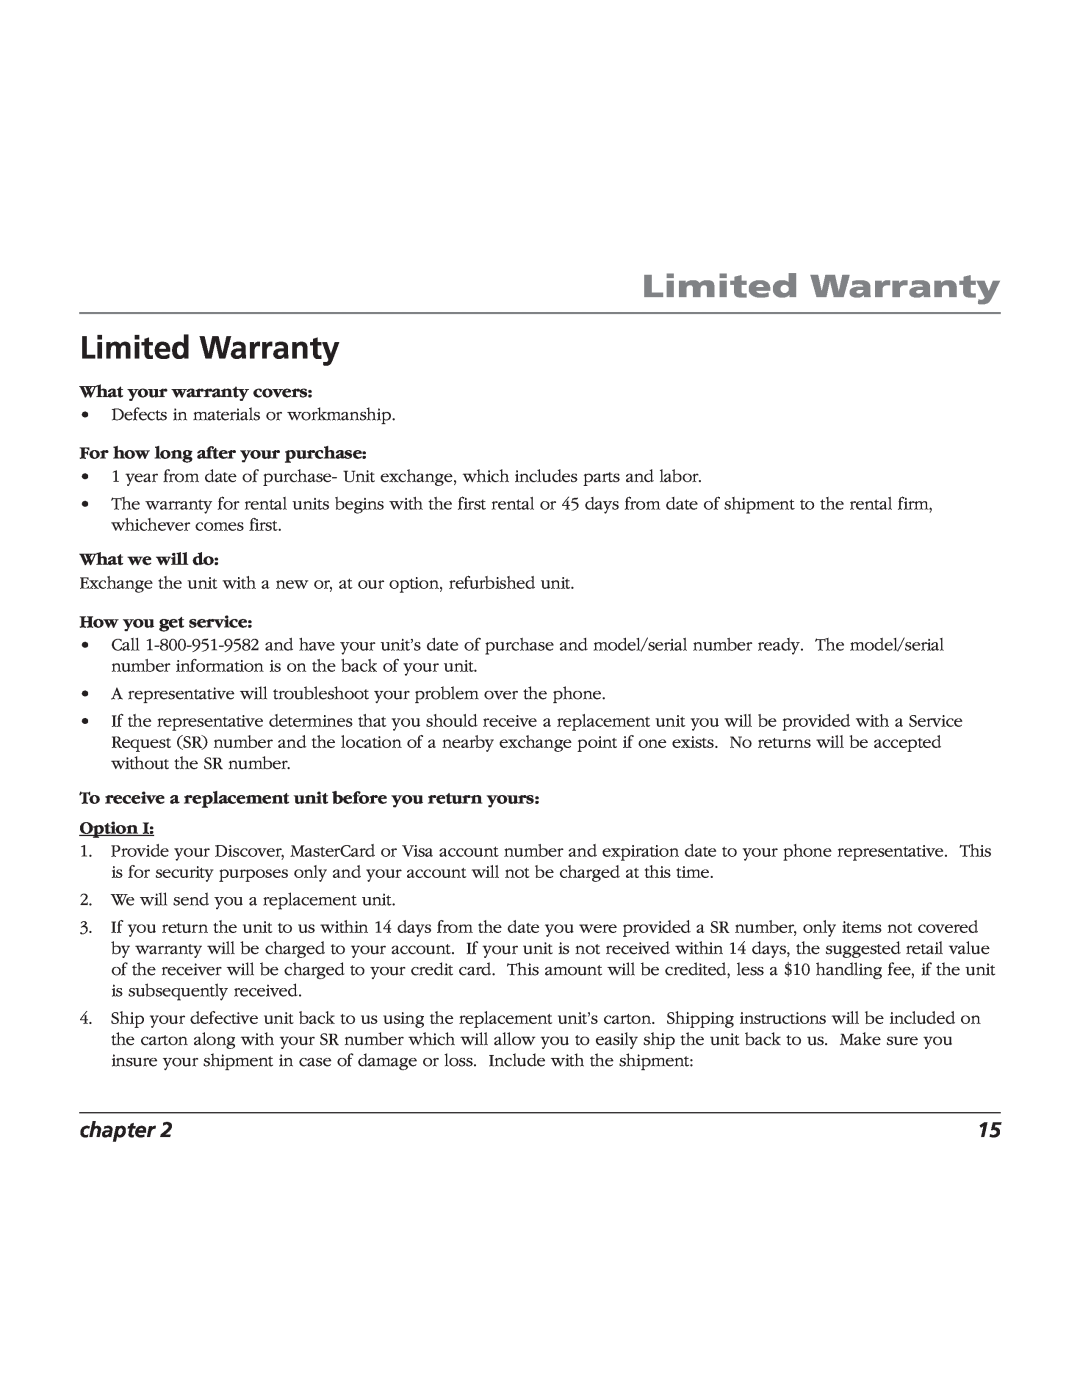 RCA TV/Radio/CD Player user manual Limited Warranty, chapter 